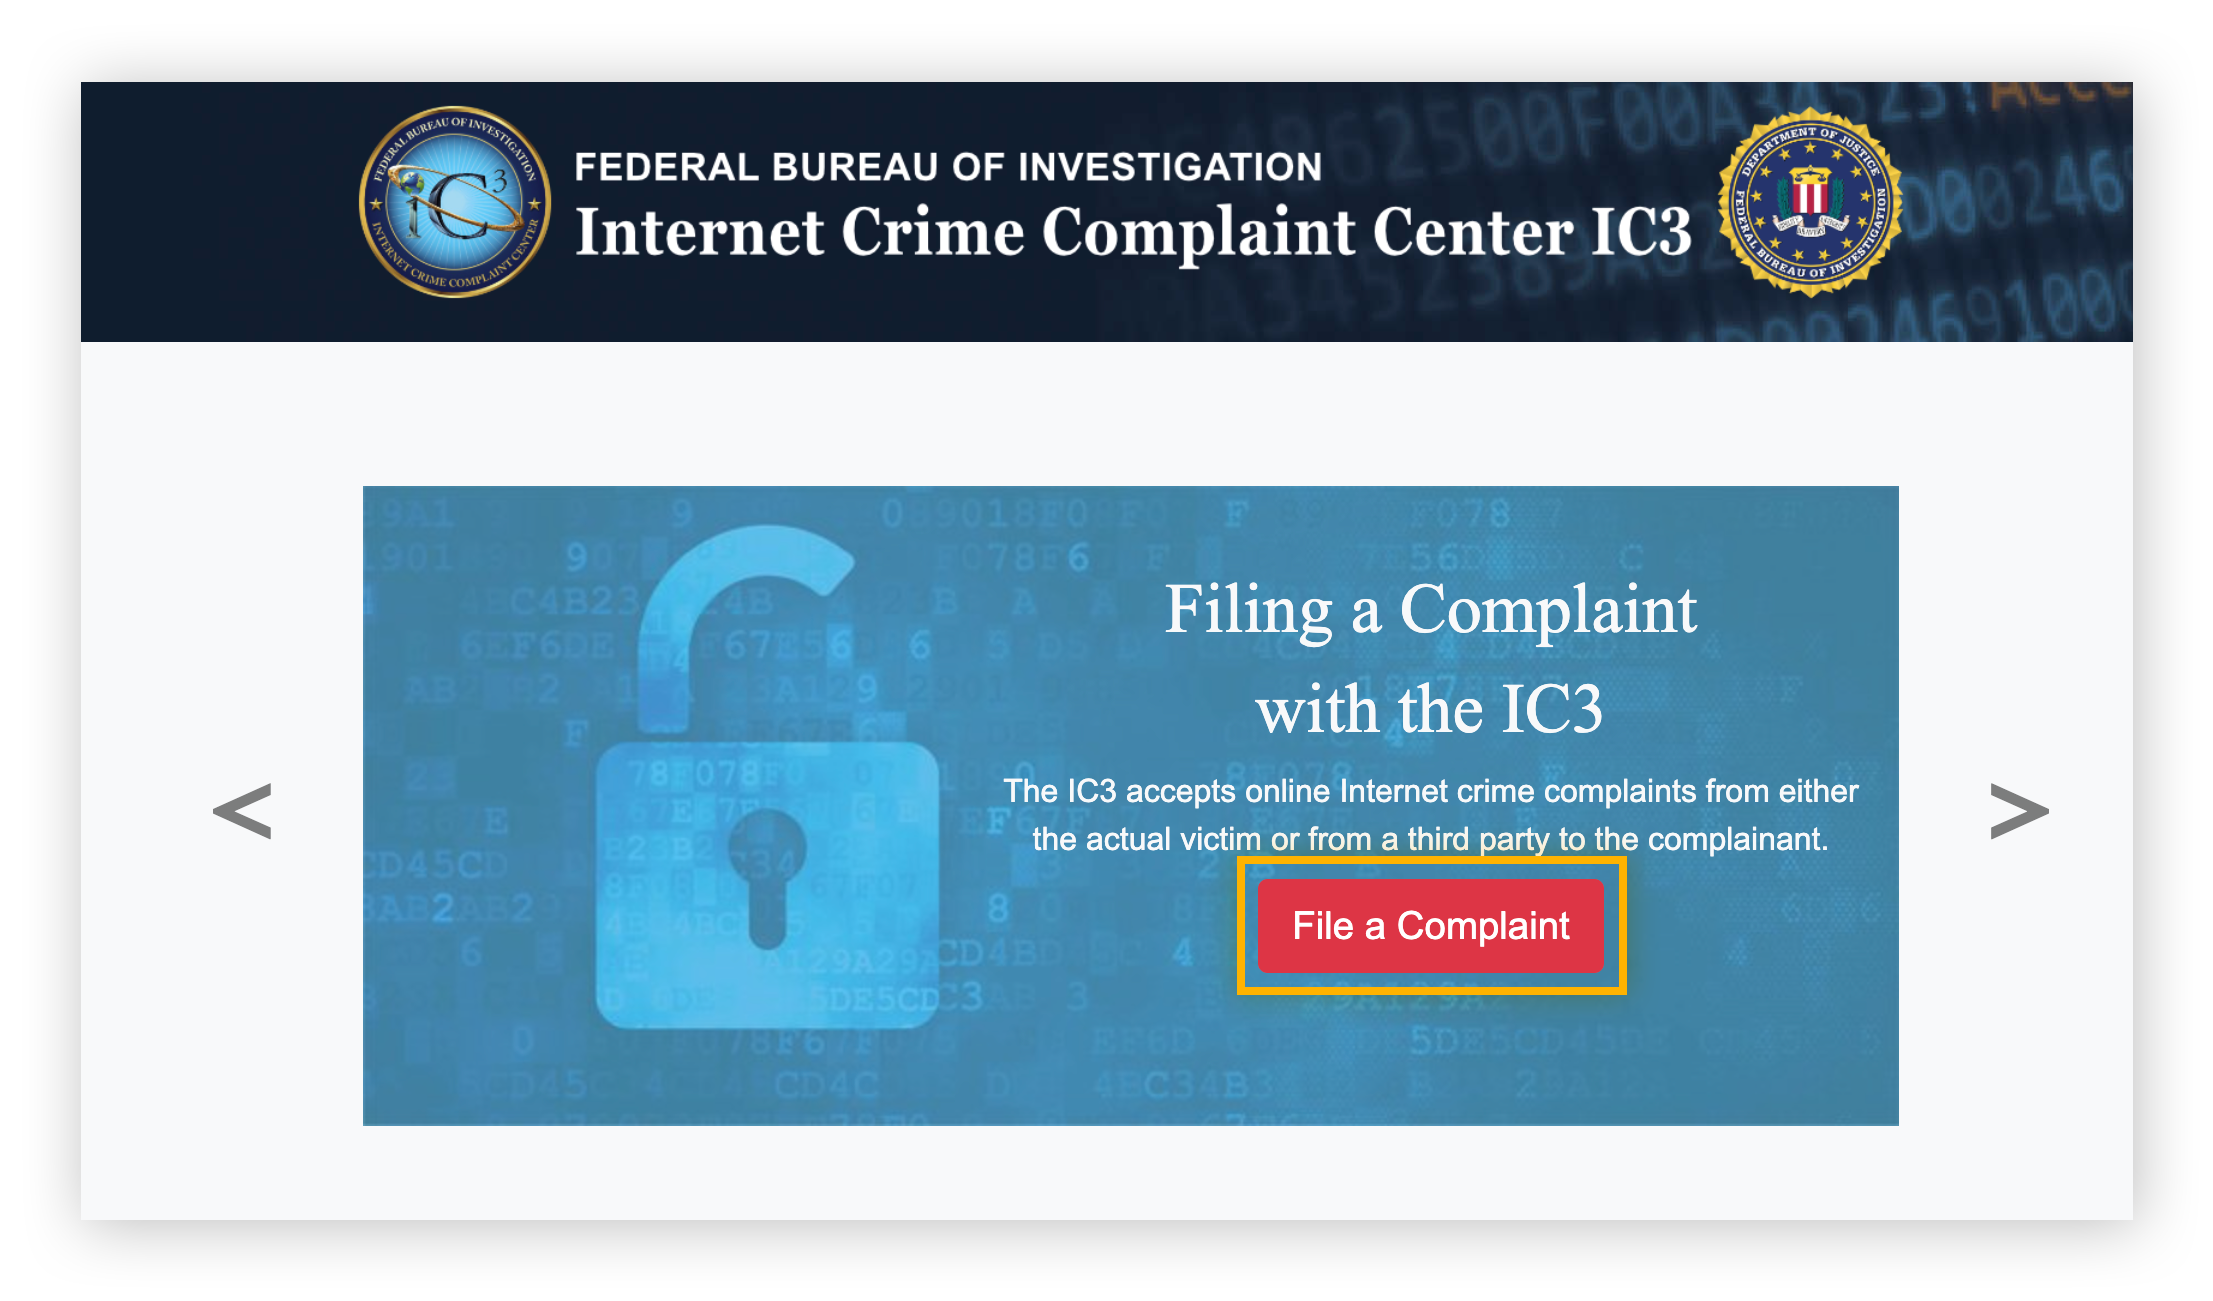 Report a crime on the Internet to IC3 using the report form.